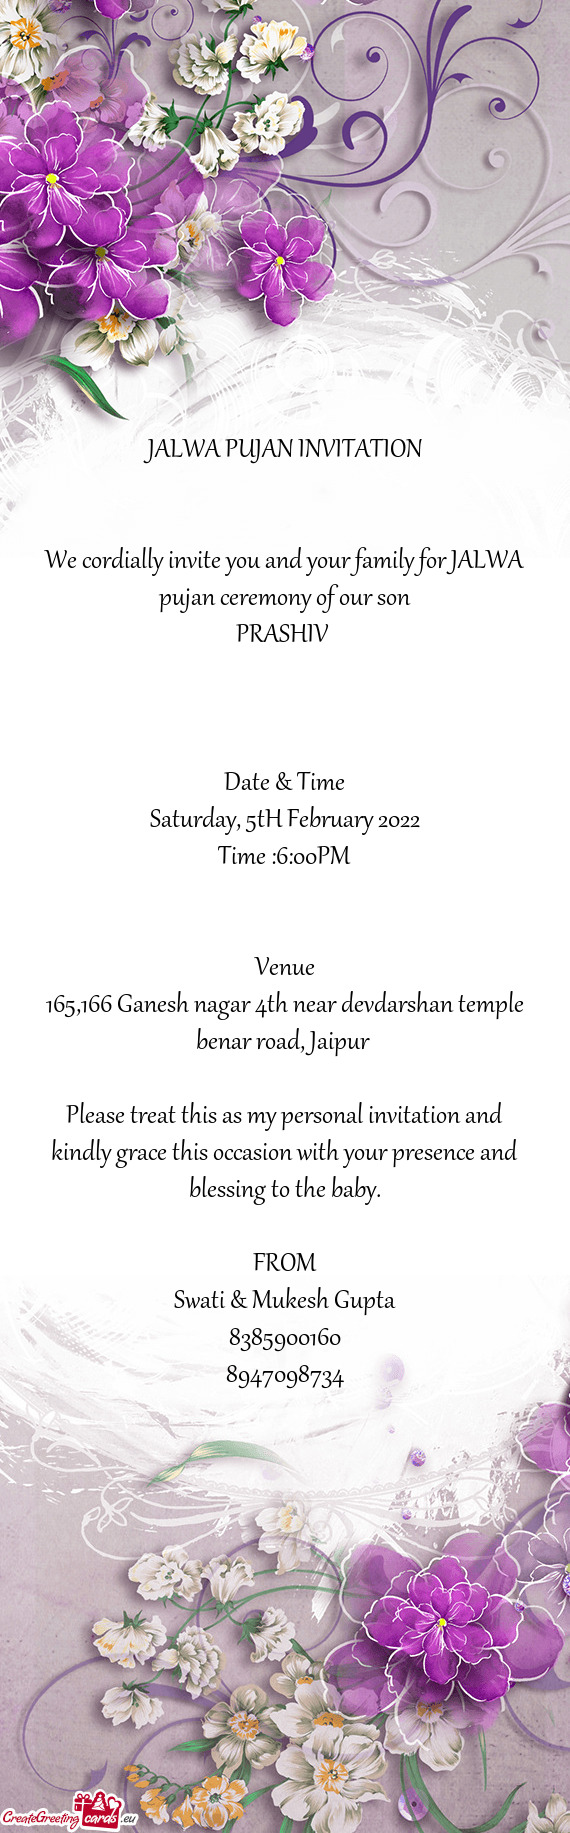 We cordially invite you and your family for JALWA pujan ceremony of our son